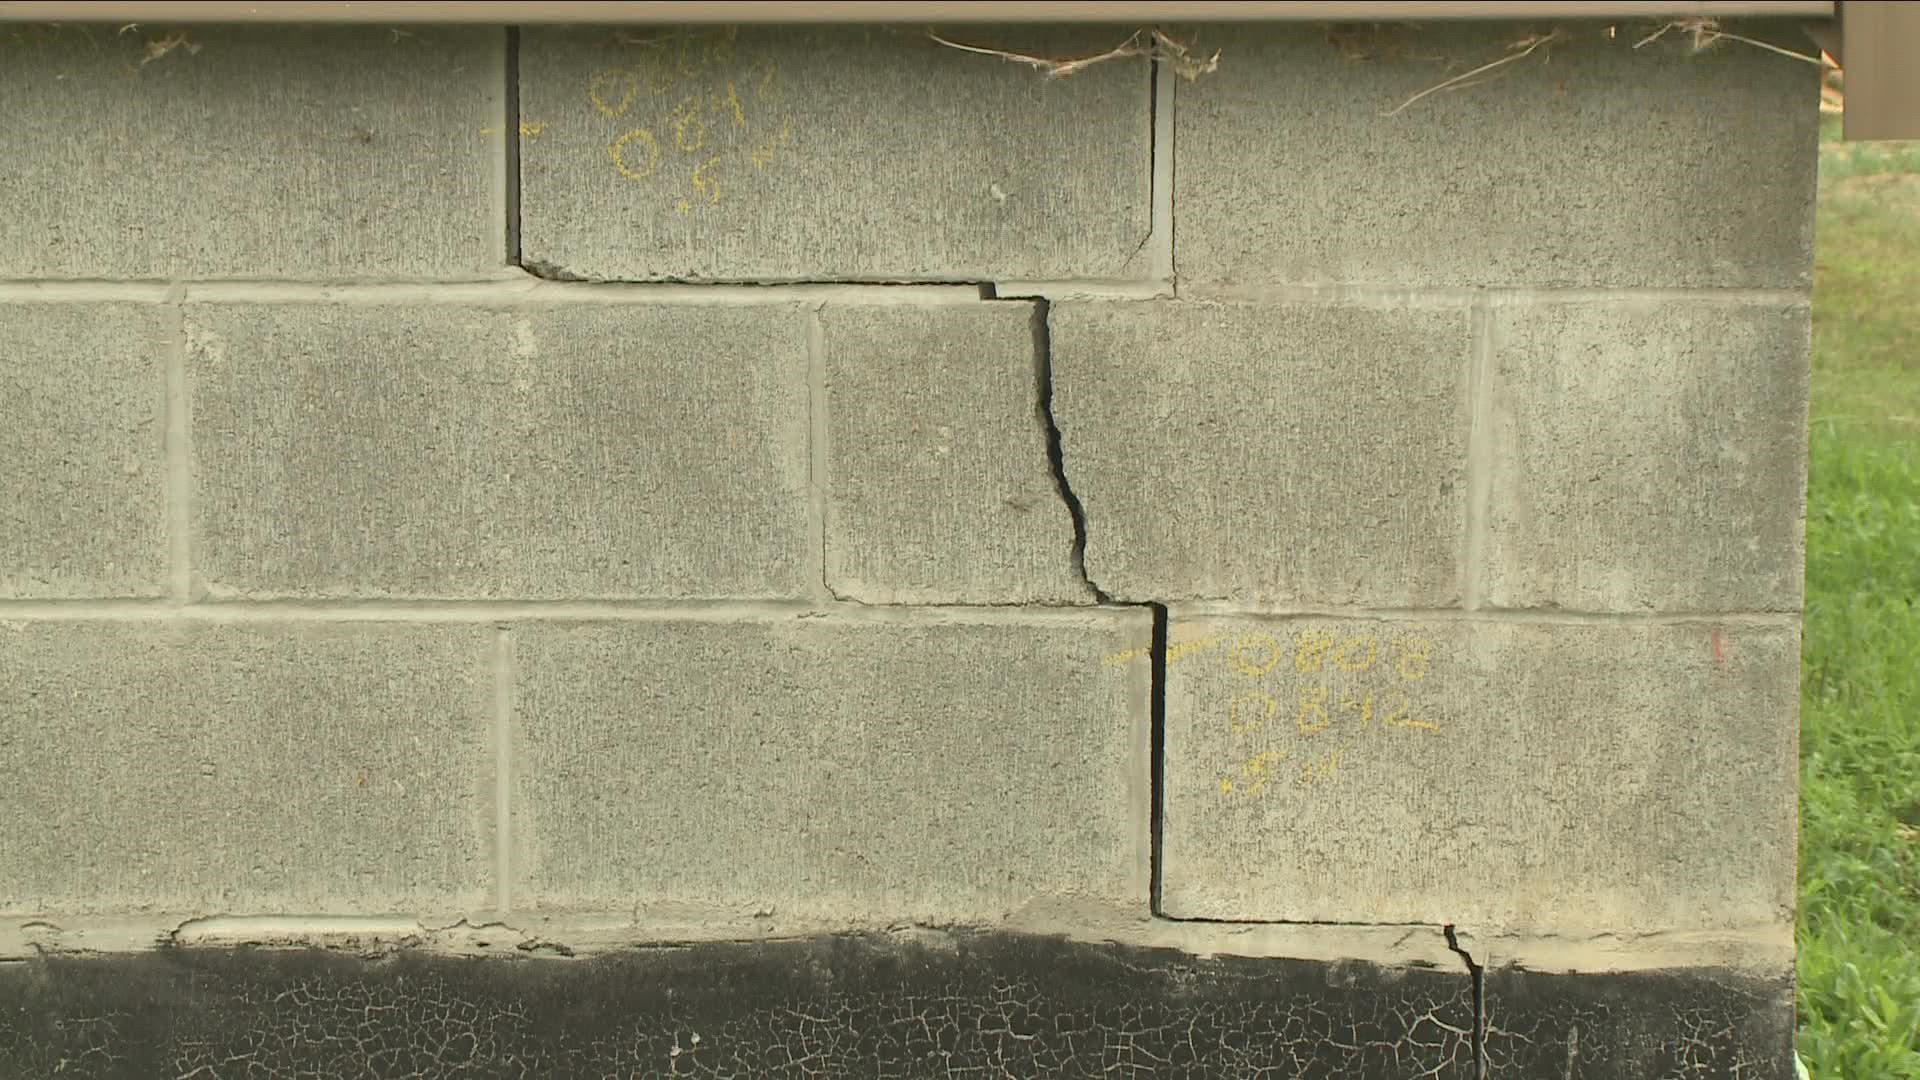 cracks in the ground, cracks in the actual road surface, and perhaps most concerning cracks in the foundation of the ten year old home of Gene Nati...